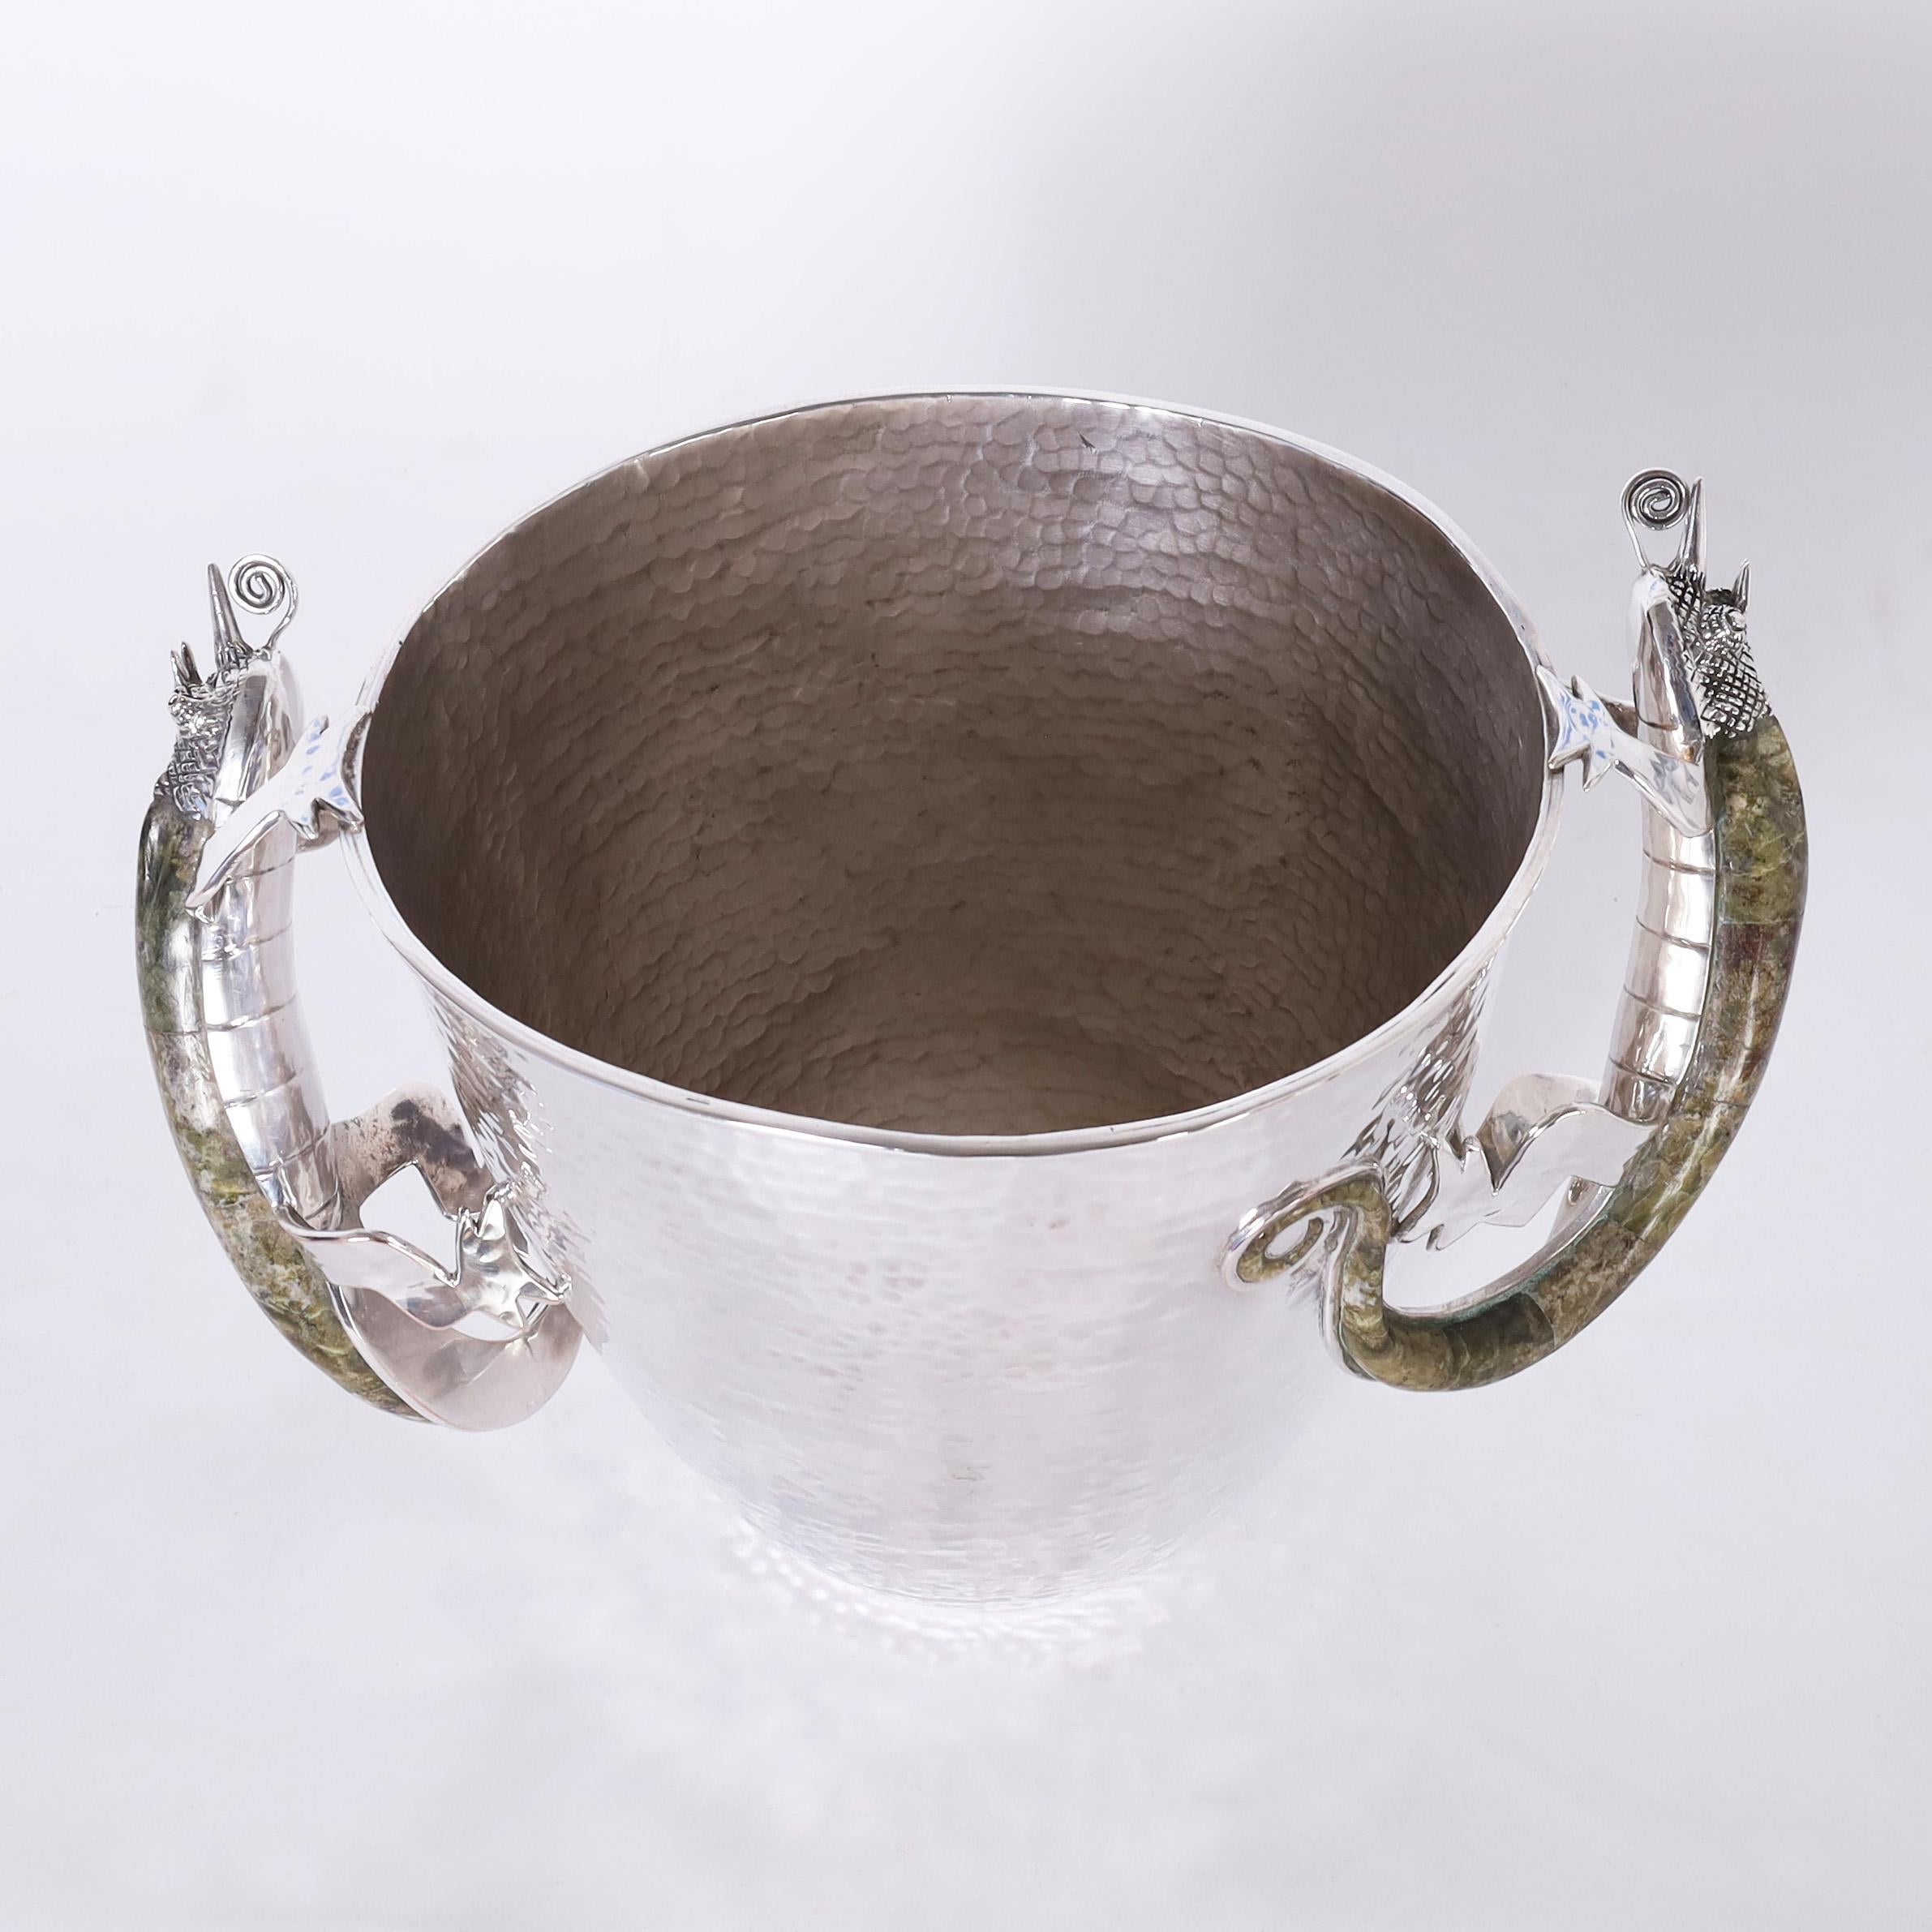 Hand-Crafted Vintage Silver Plate Ice Bucket with Lizard Handles by Wolmar Castillo For Sale